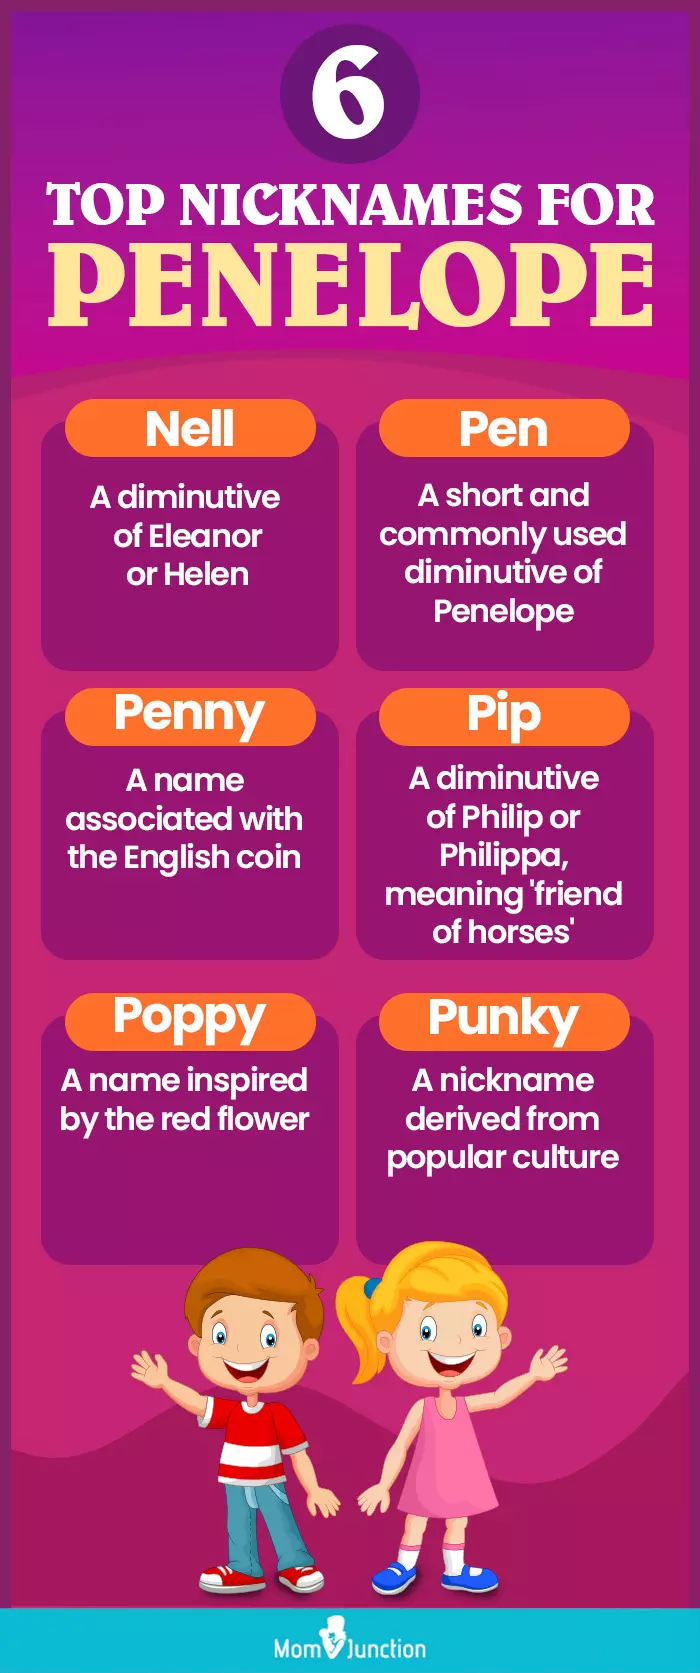 6 top nicknames for penelope (infographic)